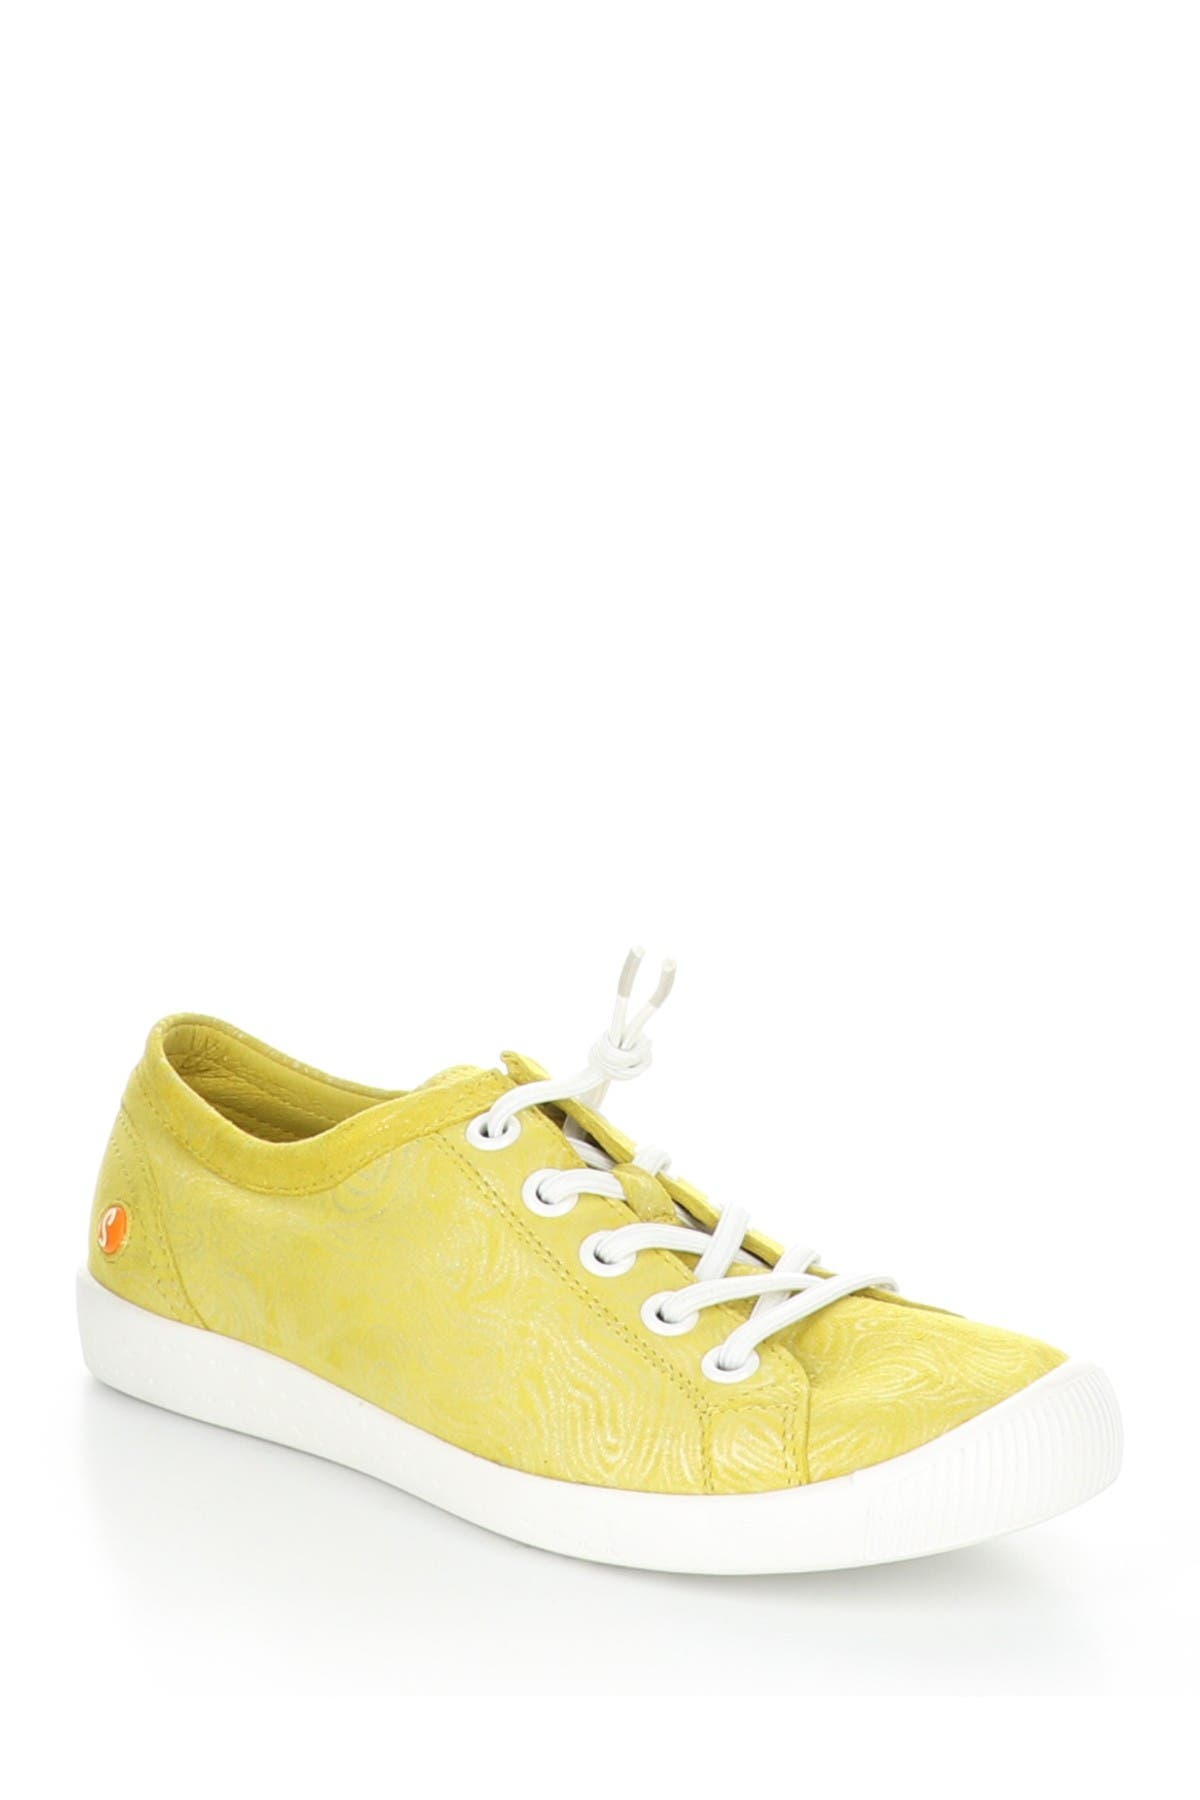 Softinos By Fly London Isla Distressed Sneaker In 015 Yellow Suede Cur